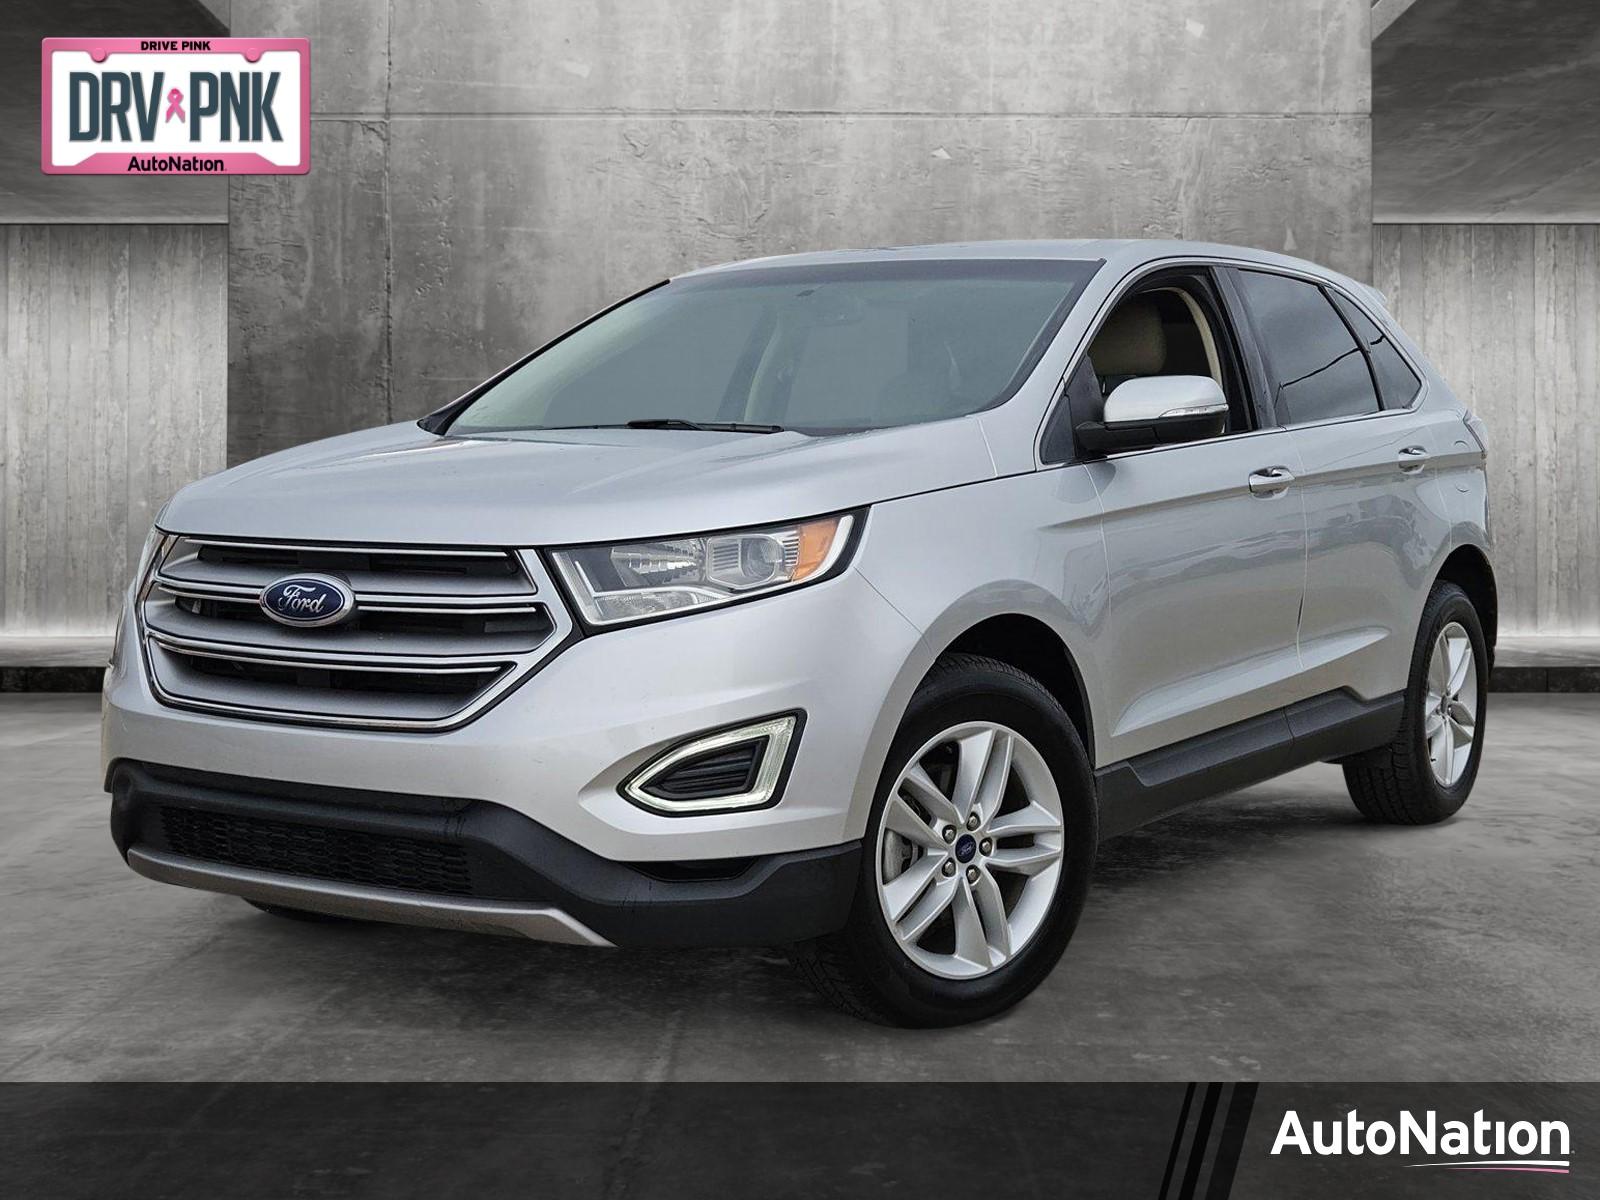 2018 Ford Edge Vehicle Photo in NORTH RICHLAND HILLS, TX 76180-7199